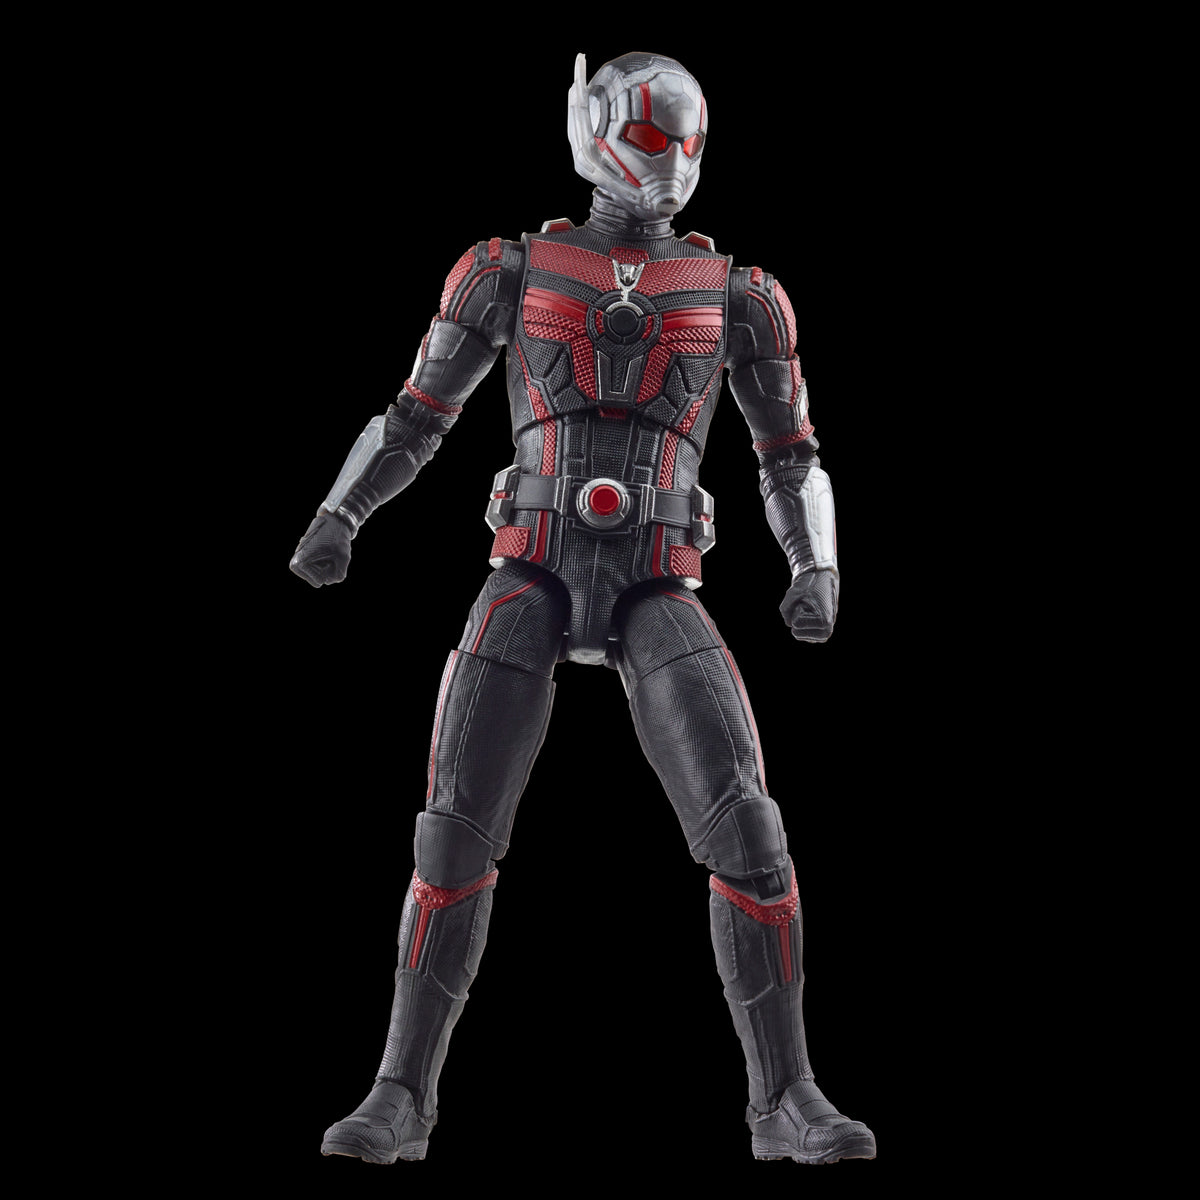 Ant-Man and the Wasp is now available! : r/DisneyPlus